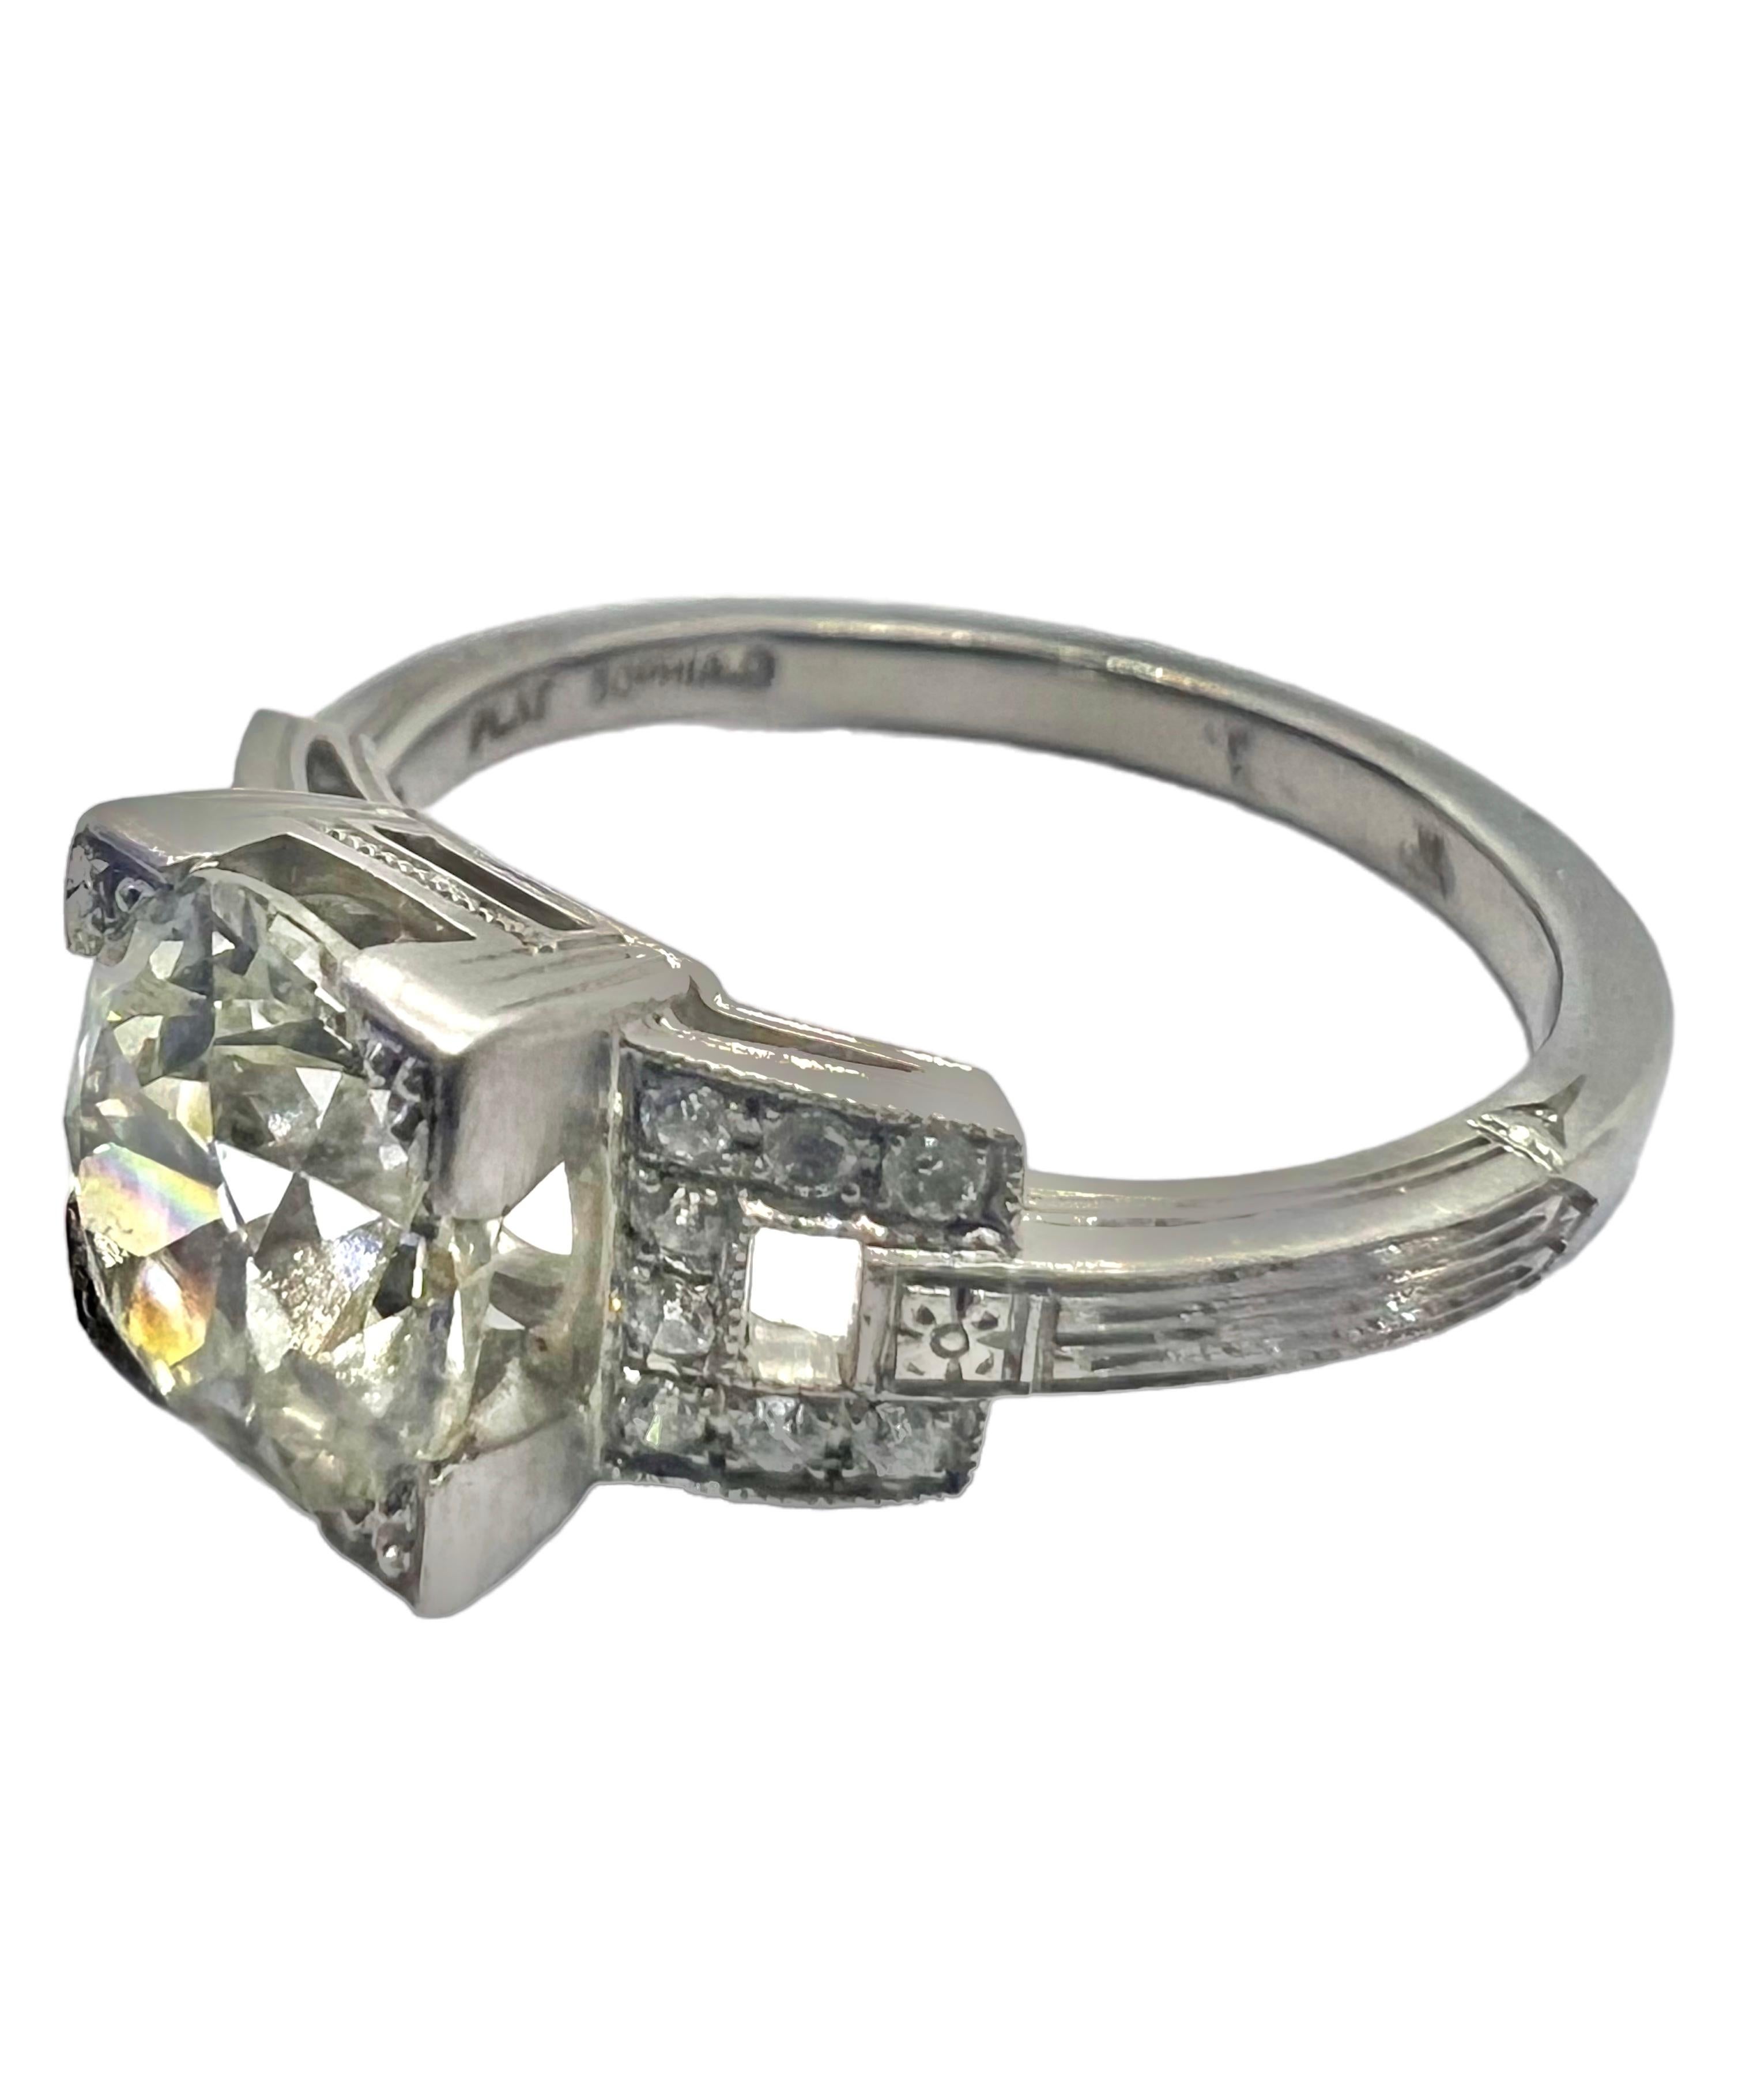 An art deco platinum ring with 1.89 carat round diamond and small round diamonds with 0.10 carat small diamonds.

Sophia D by Joseph Dardashti LTD has been known worldwide for 35 years and are inspired by classic Art Deco design that merges with